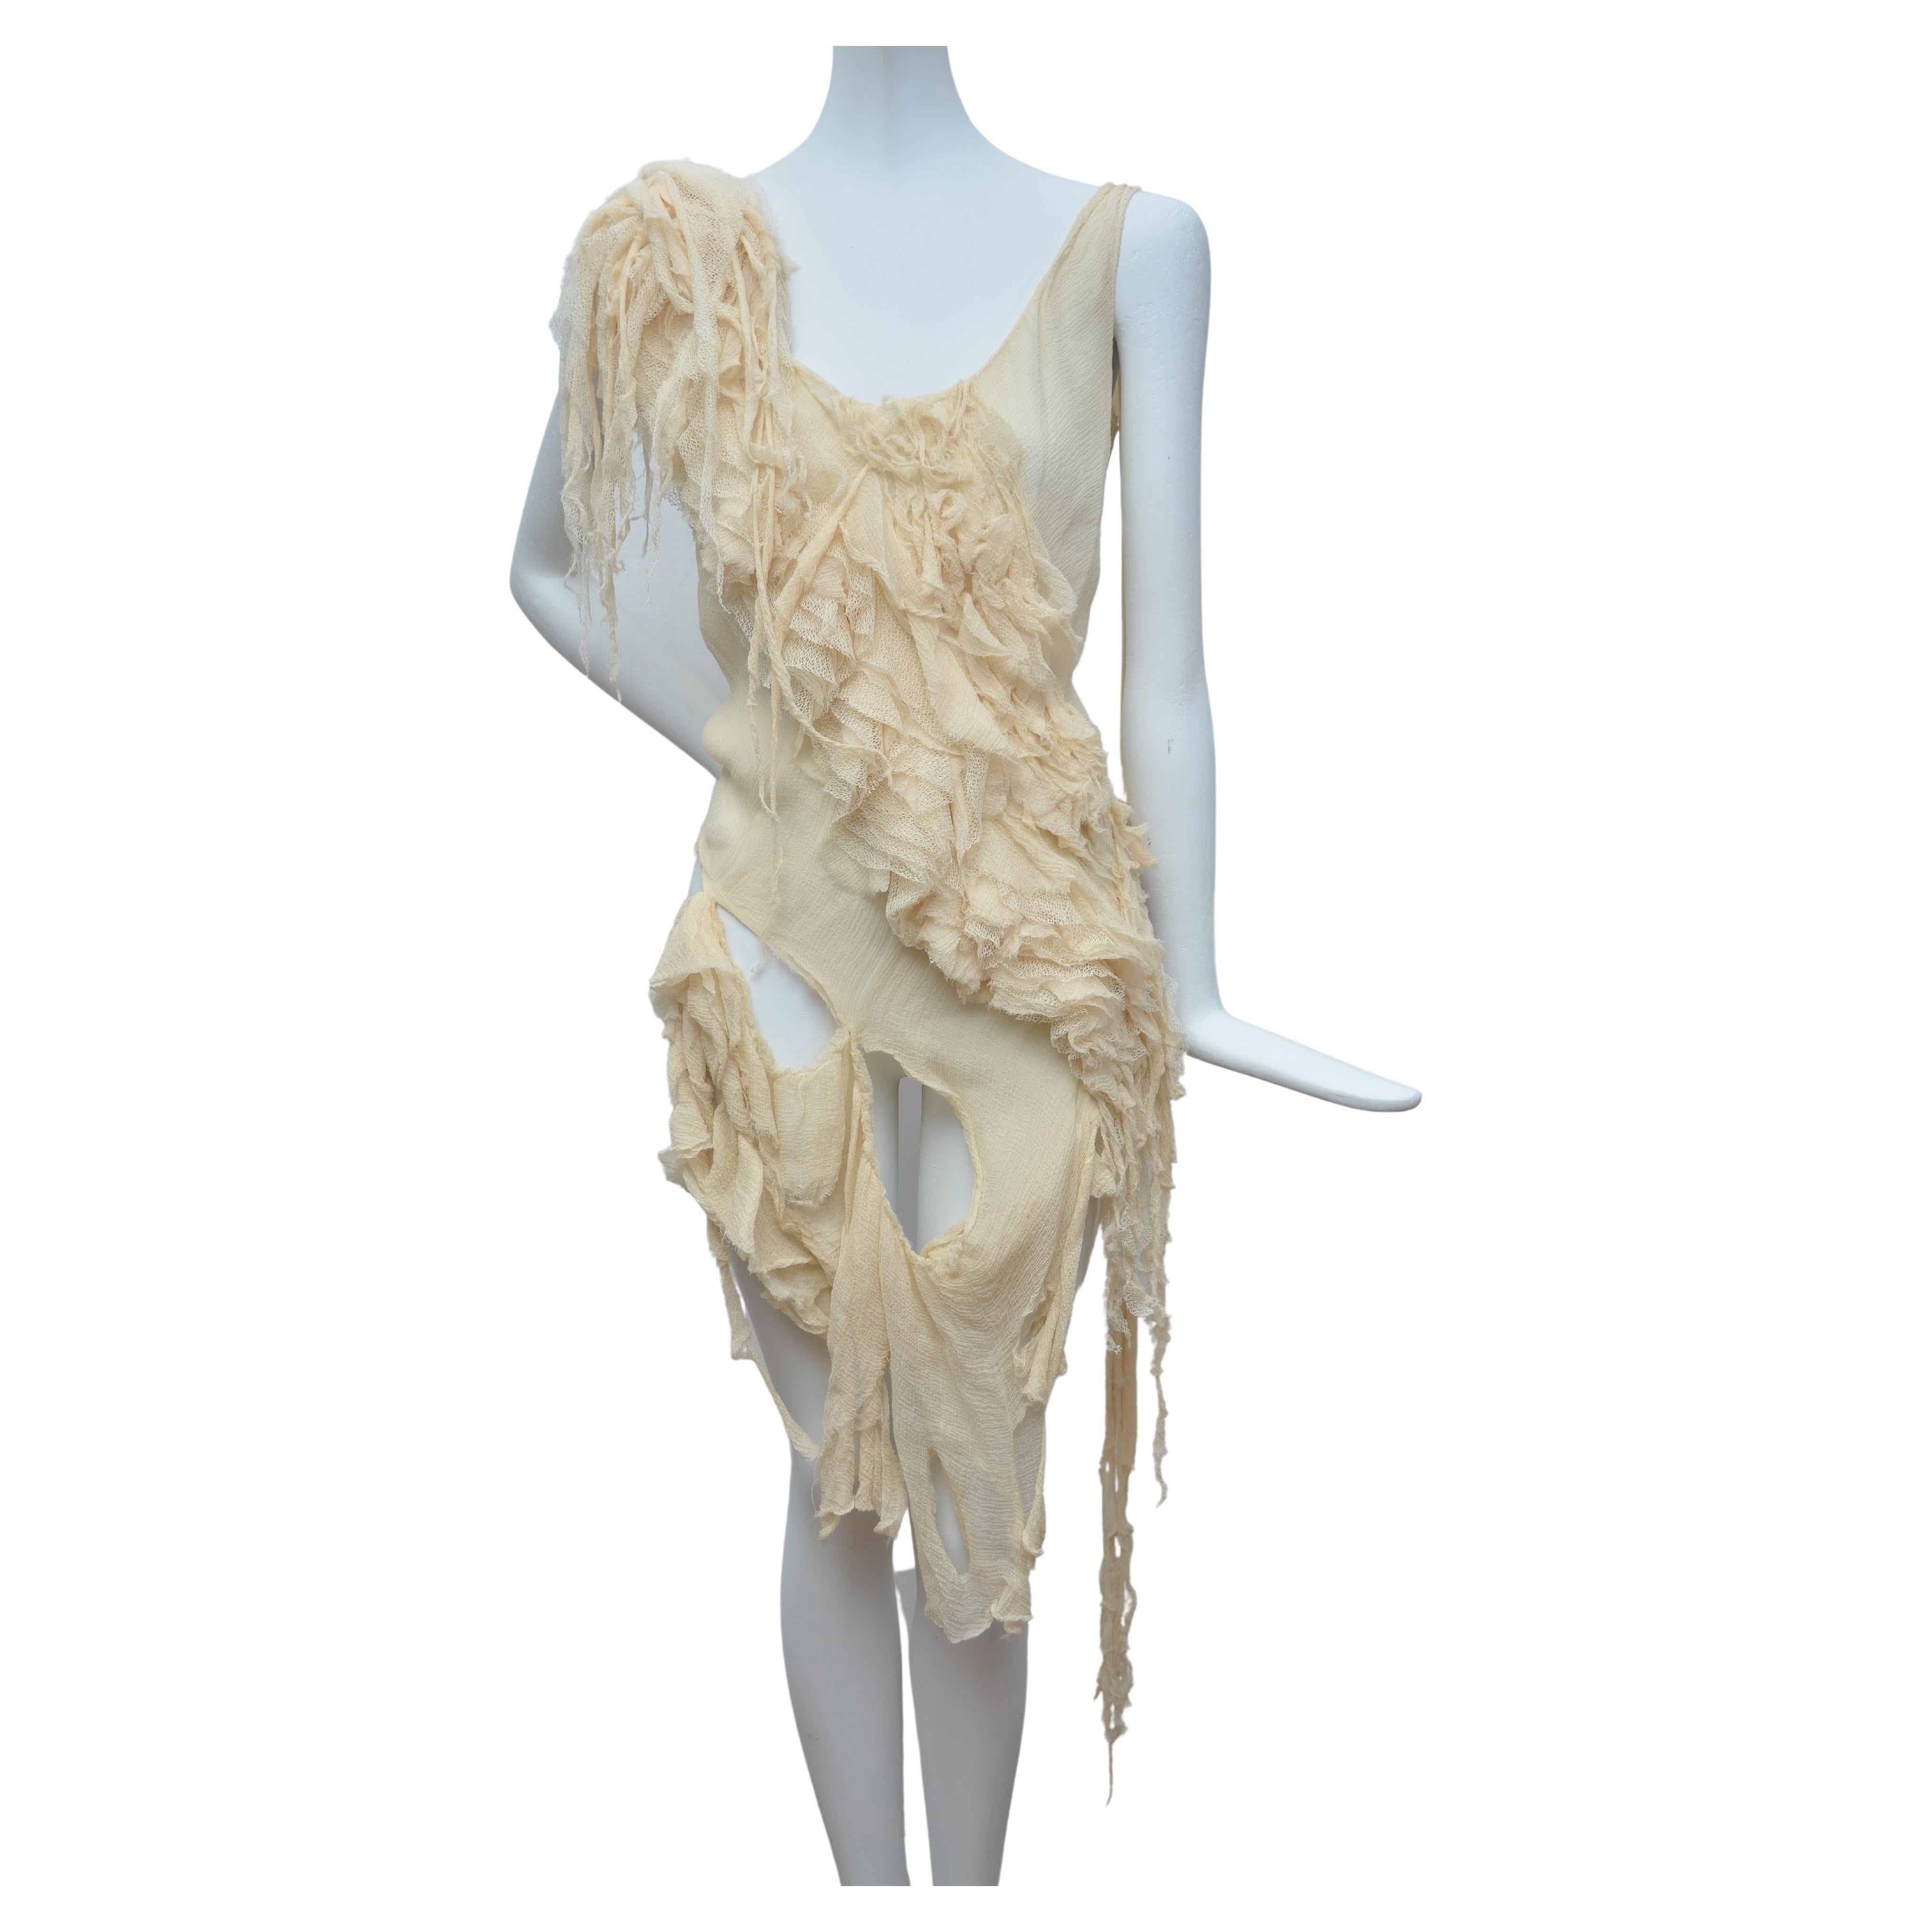 Rare  ALEXANDER MCQUEEN SS03 Oyster beige raw distress ruffle drape top 
Size IT40 S  
Off white cream silk . Distressed frayed edges . 
Ruffle allover . Knotted and draped strands on left shoulder .
Irregular drapes . Raw cut fabric . Made in Italy